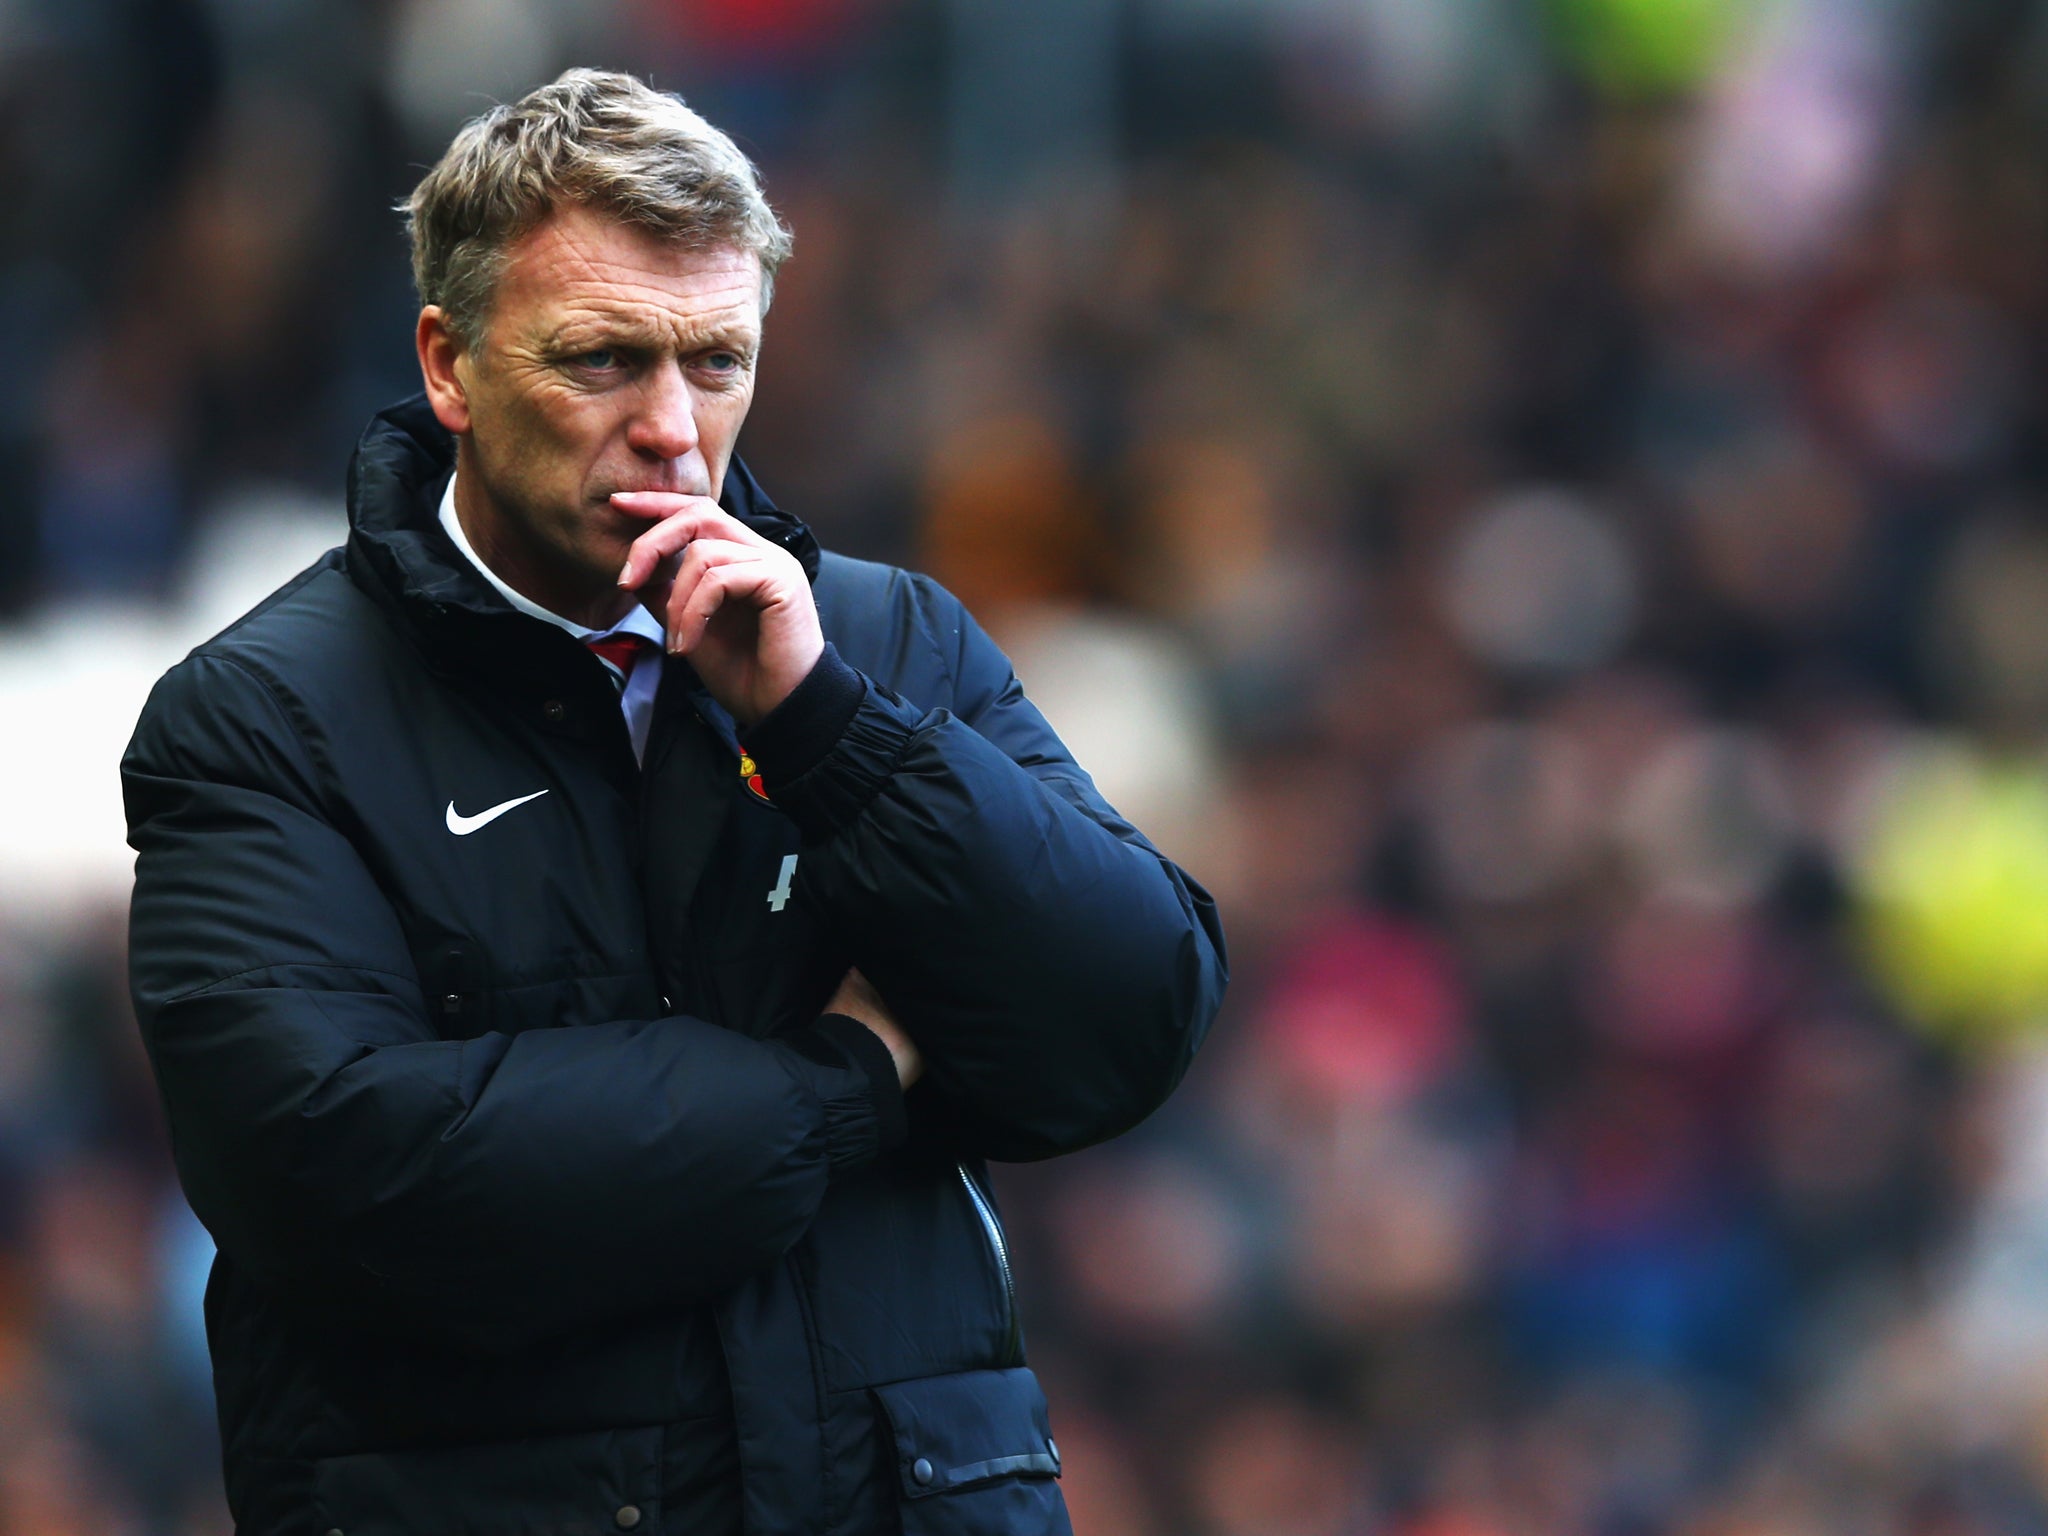 David Moyes looks on during his Manchester United side's victory over Hull City